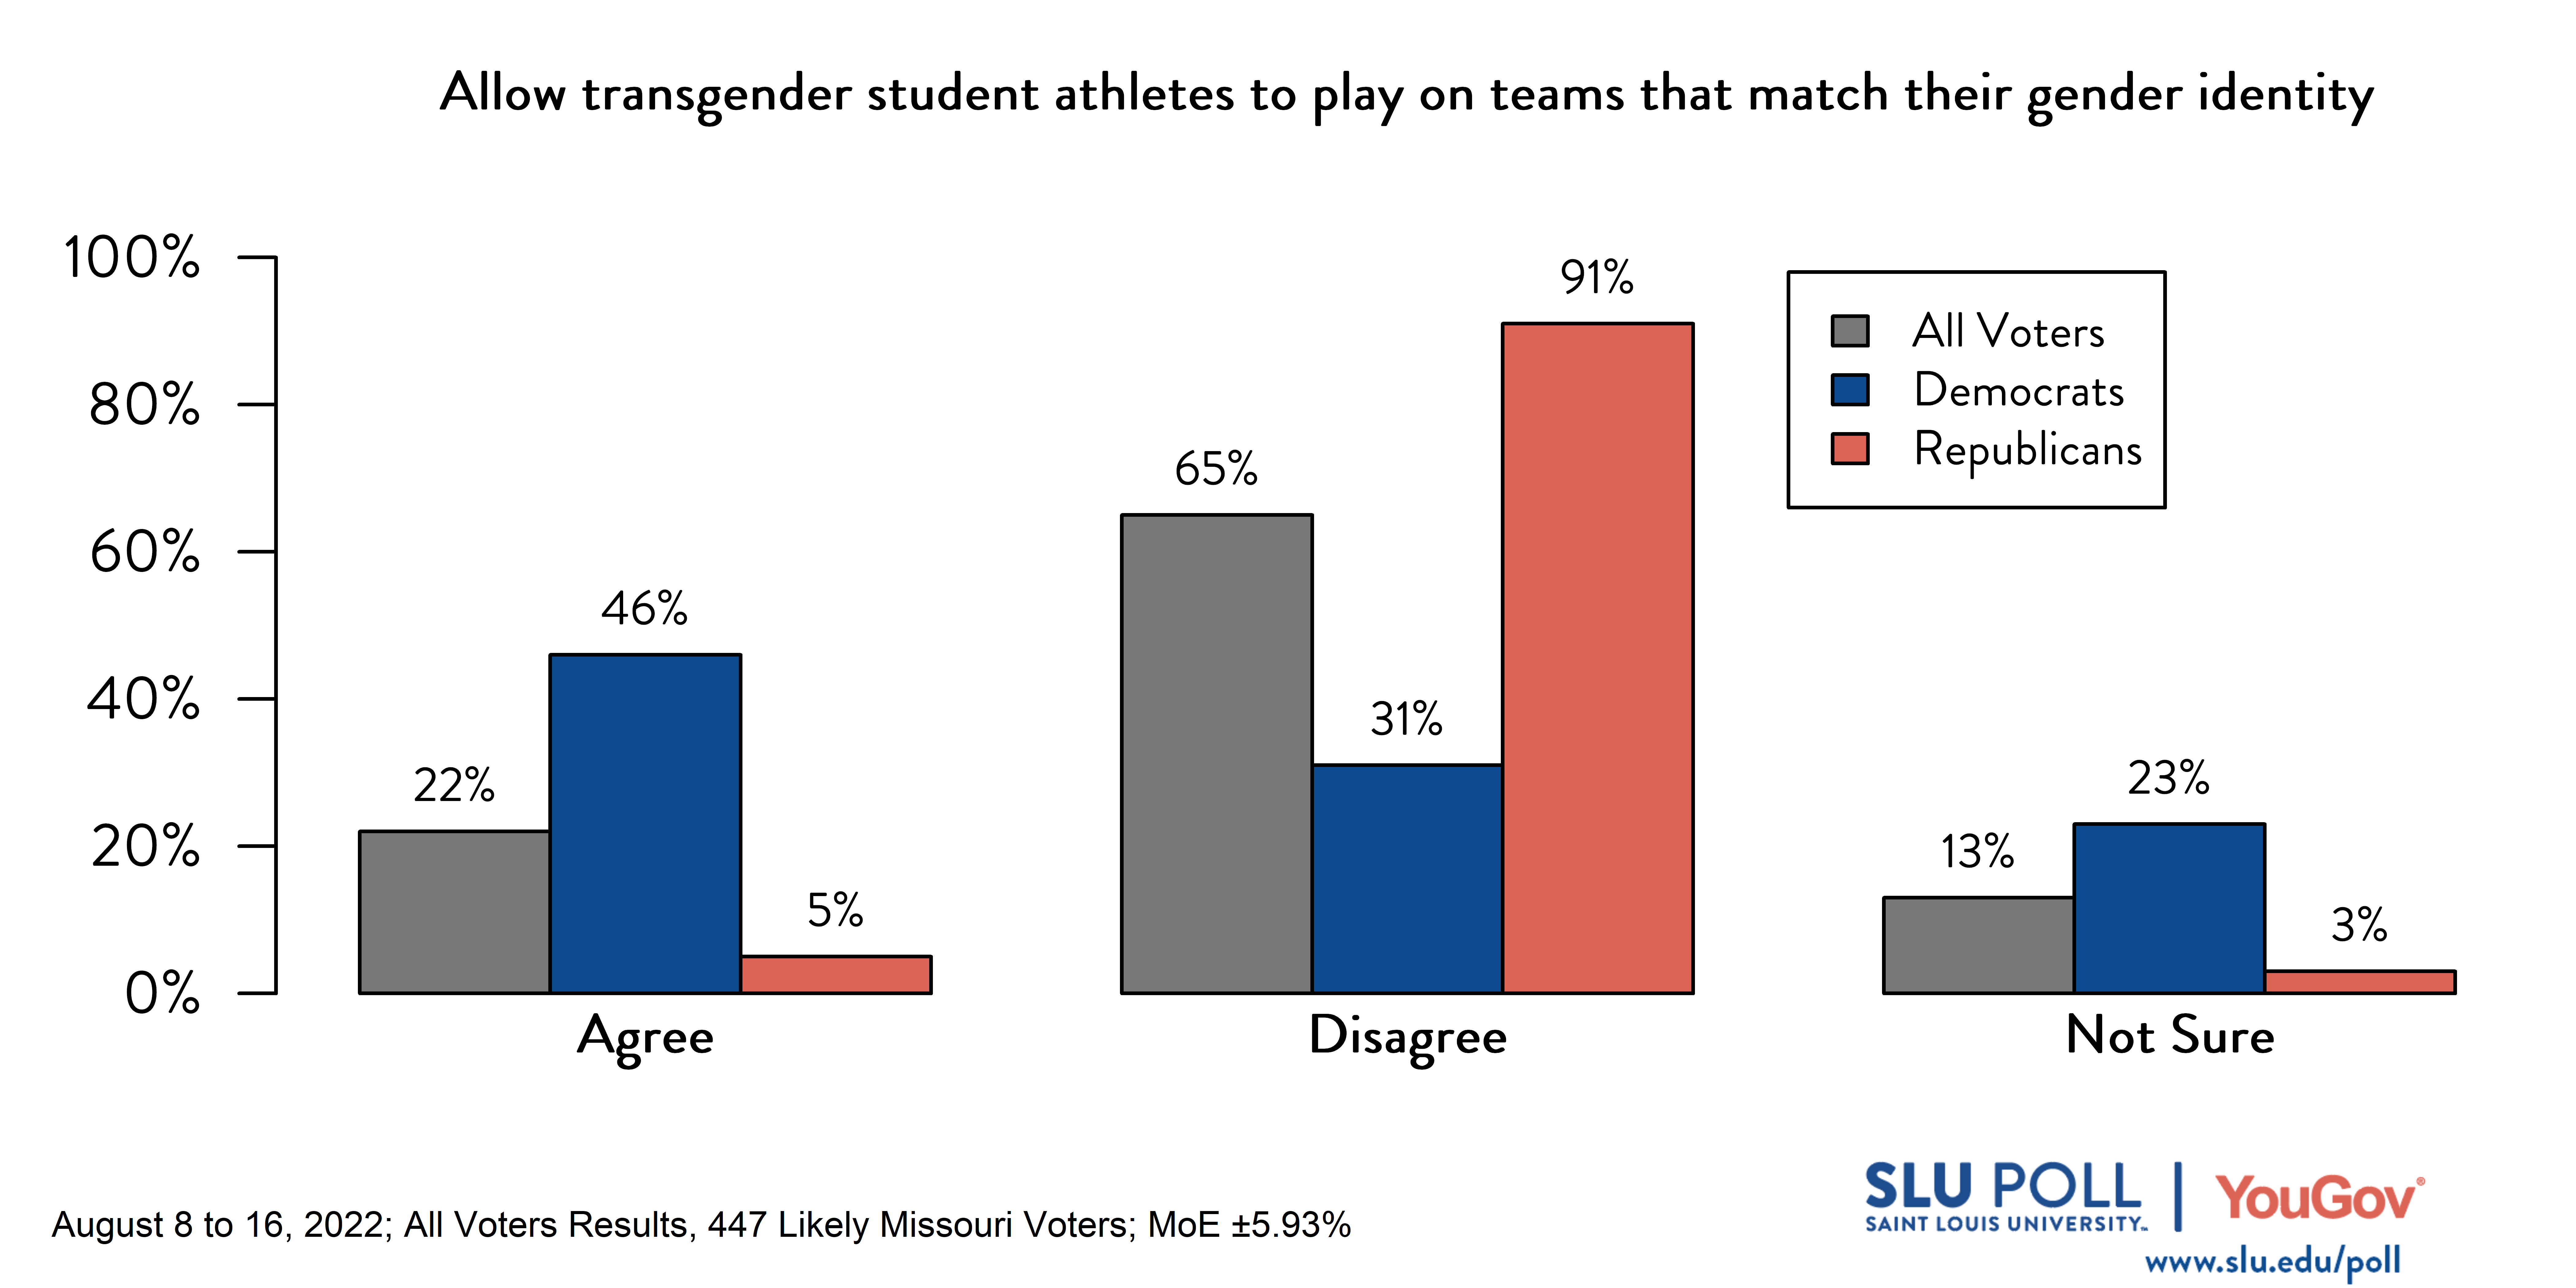 Likely voters' responses to 'Do you agree or disagree with the following statements: Allowing transgender student athletes to play on sports teams that match their gender identity, rather than the gender they were assigned at birth ': 22% Agree, 65% Disagree, and 13% Not Sure. Democratic voters' responses: ' 46% Agree, 31% Disagree, and 23% Not Sure. Republican voters' responses: 5% Agree, 91% Disagree, and 3% Not Sure. 